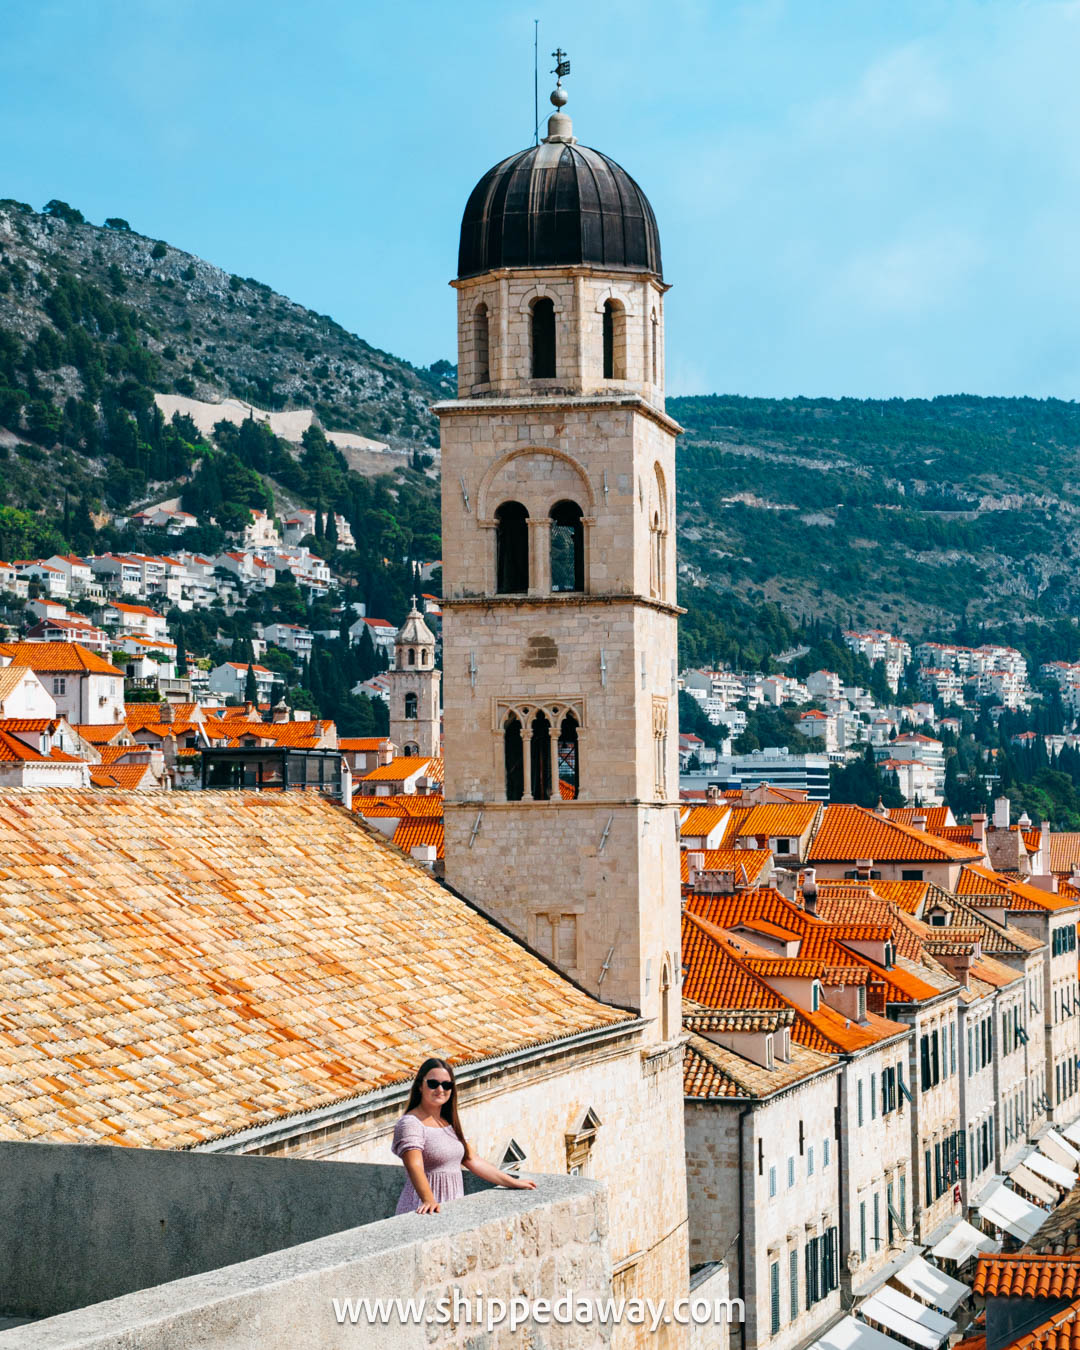 top things to do in dubrovnik, prices in dubrovnik, dubrovnik city walls, dubrovnik old town, dubrovnik travel tips, dubrovnik travel guide, dubrovnik croatia